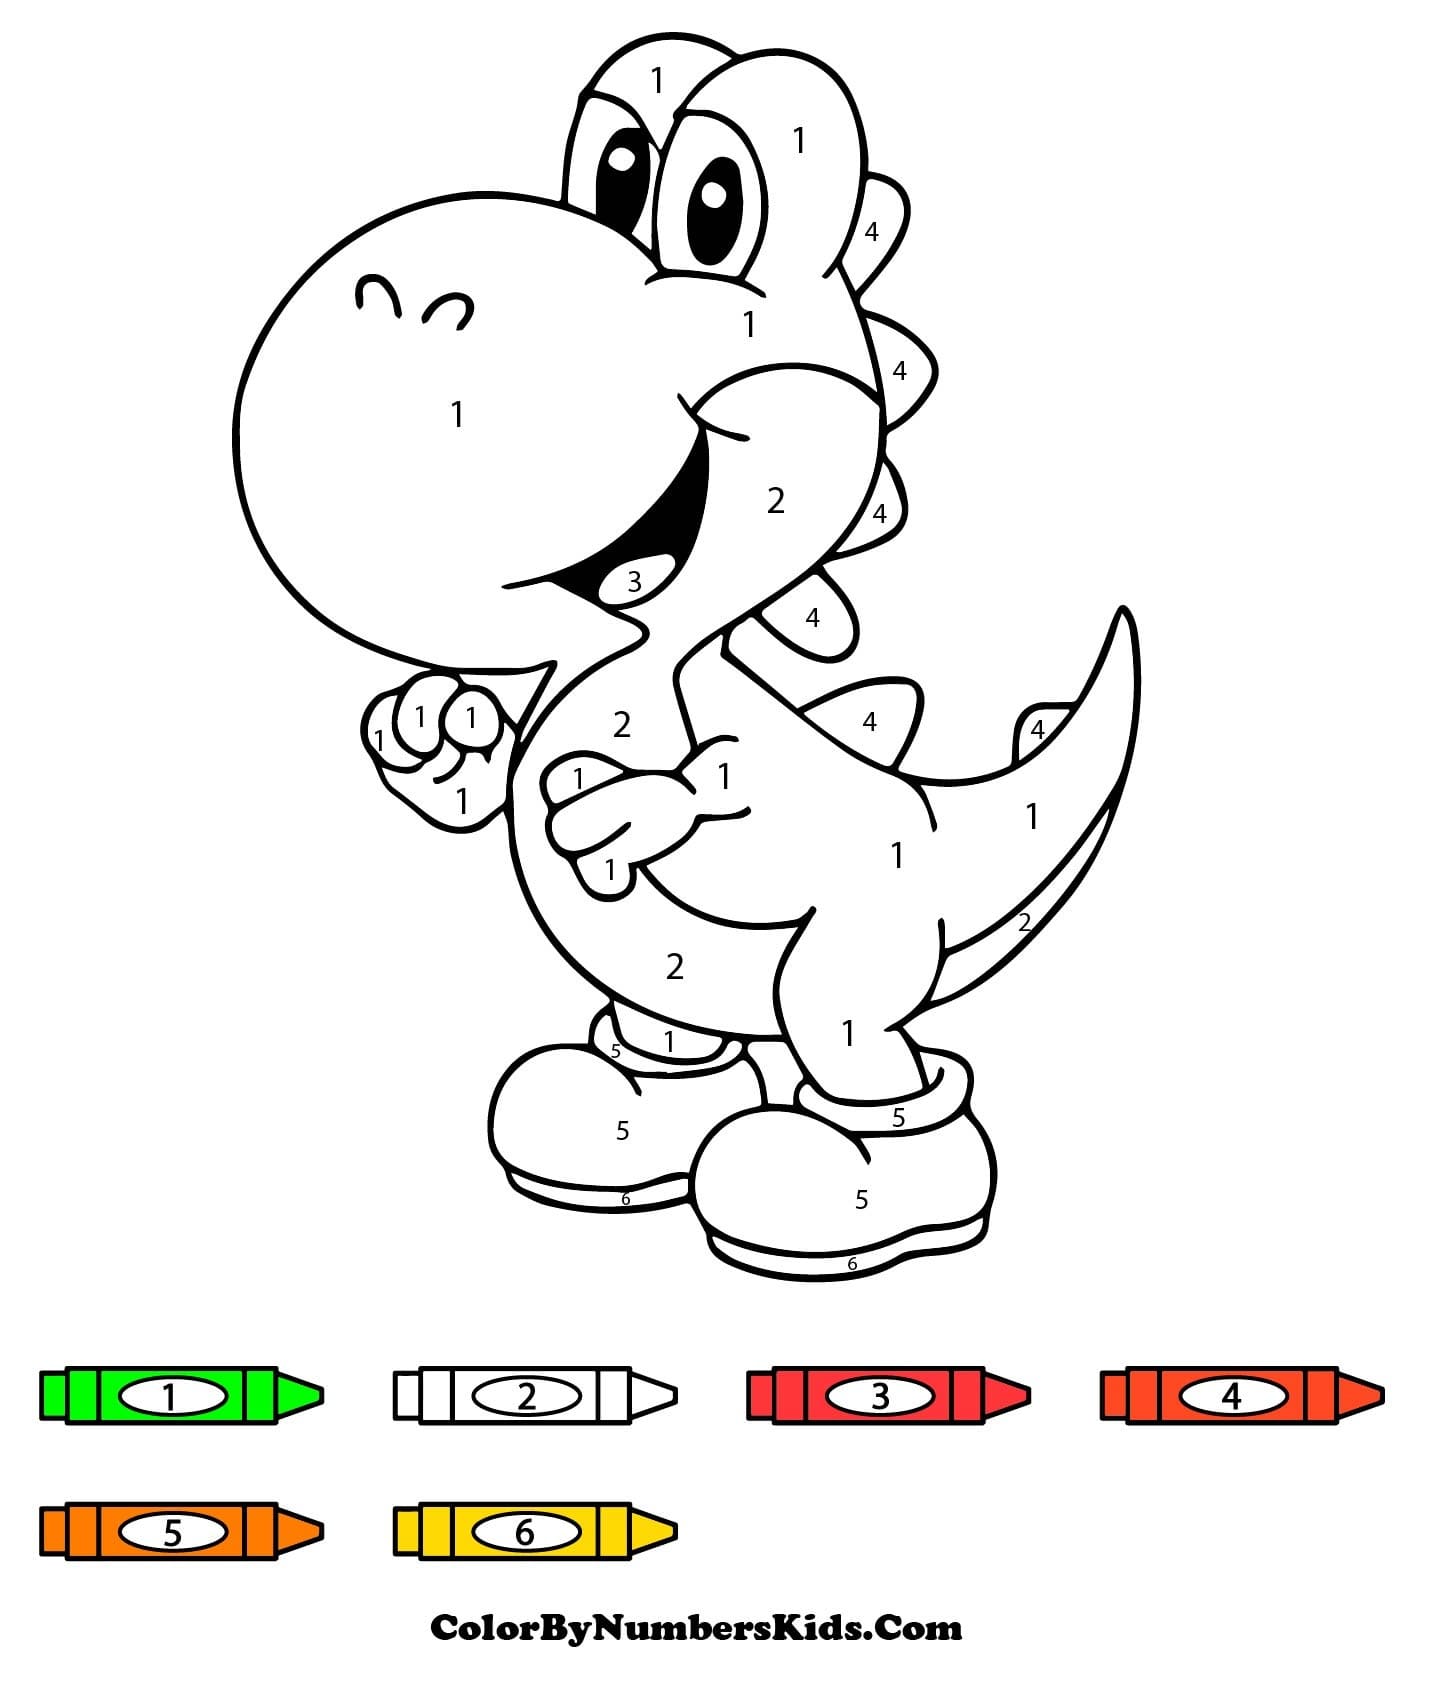 Cool Yoshi Color By Number